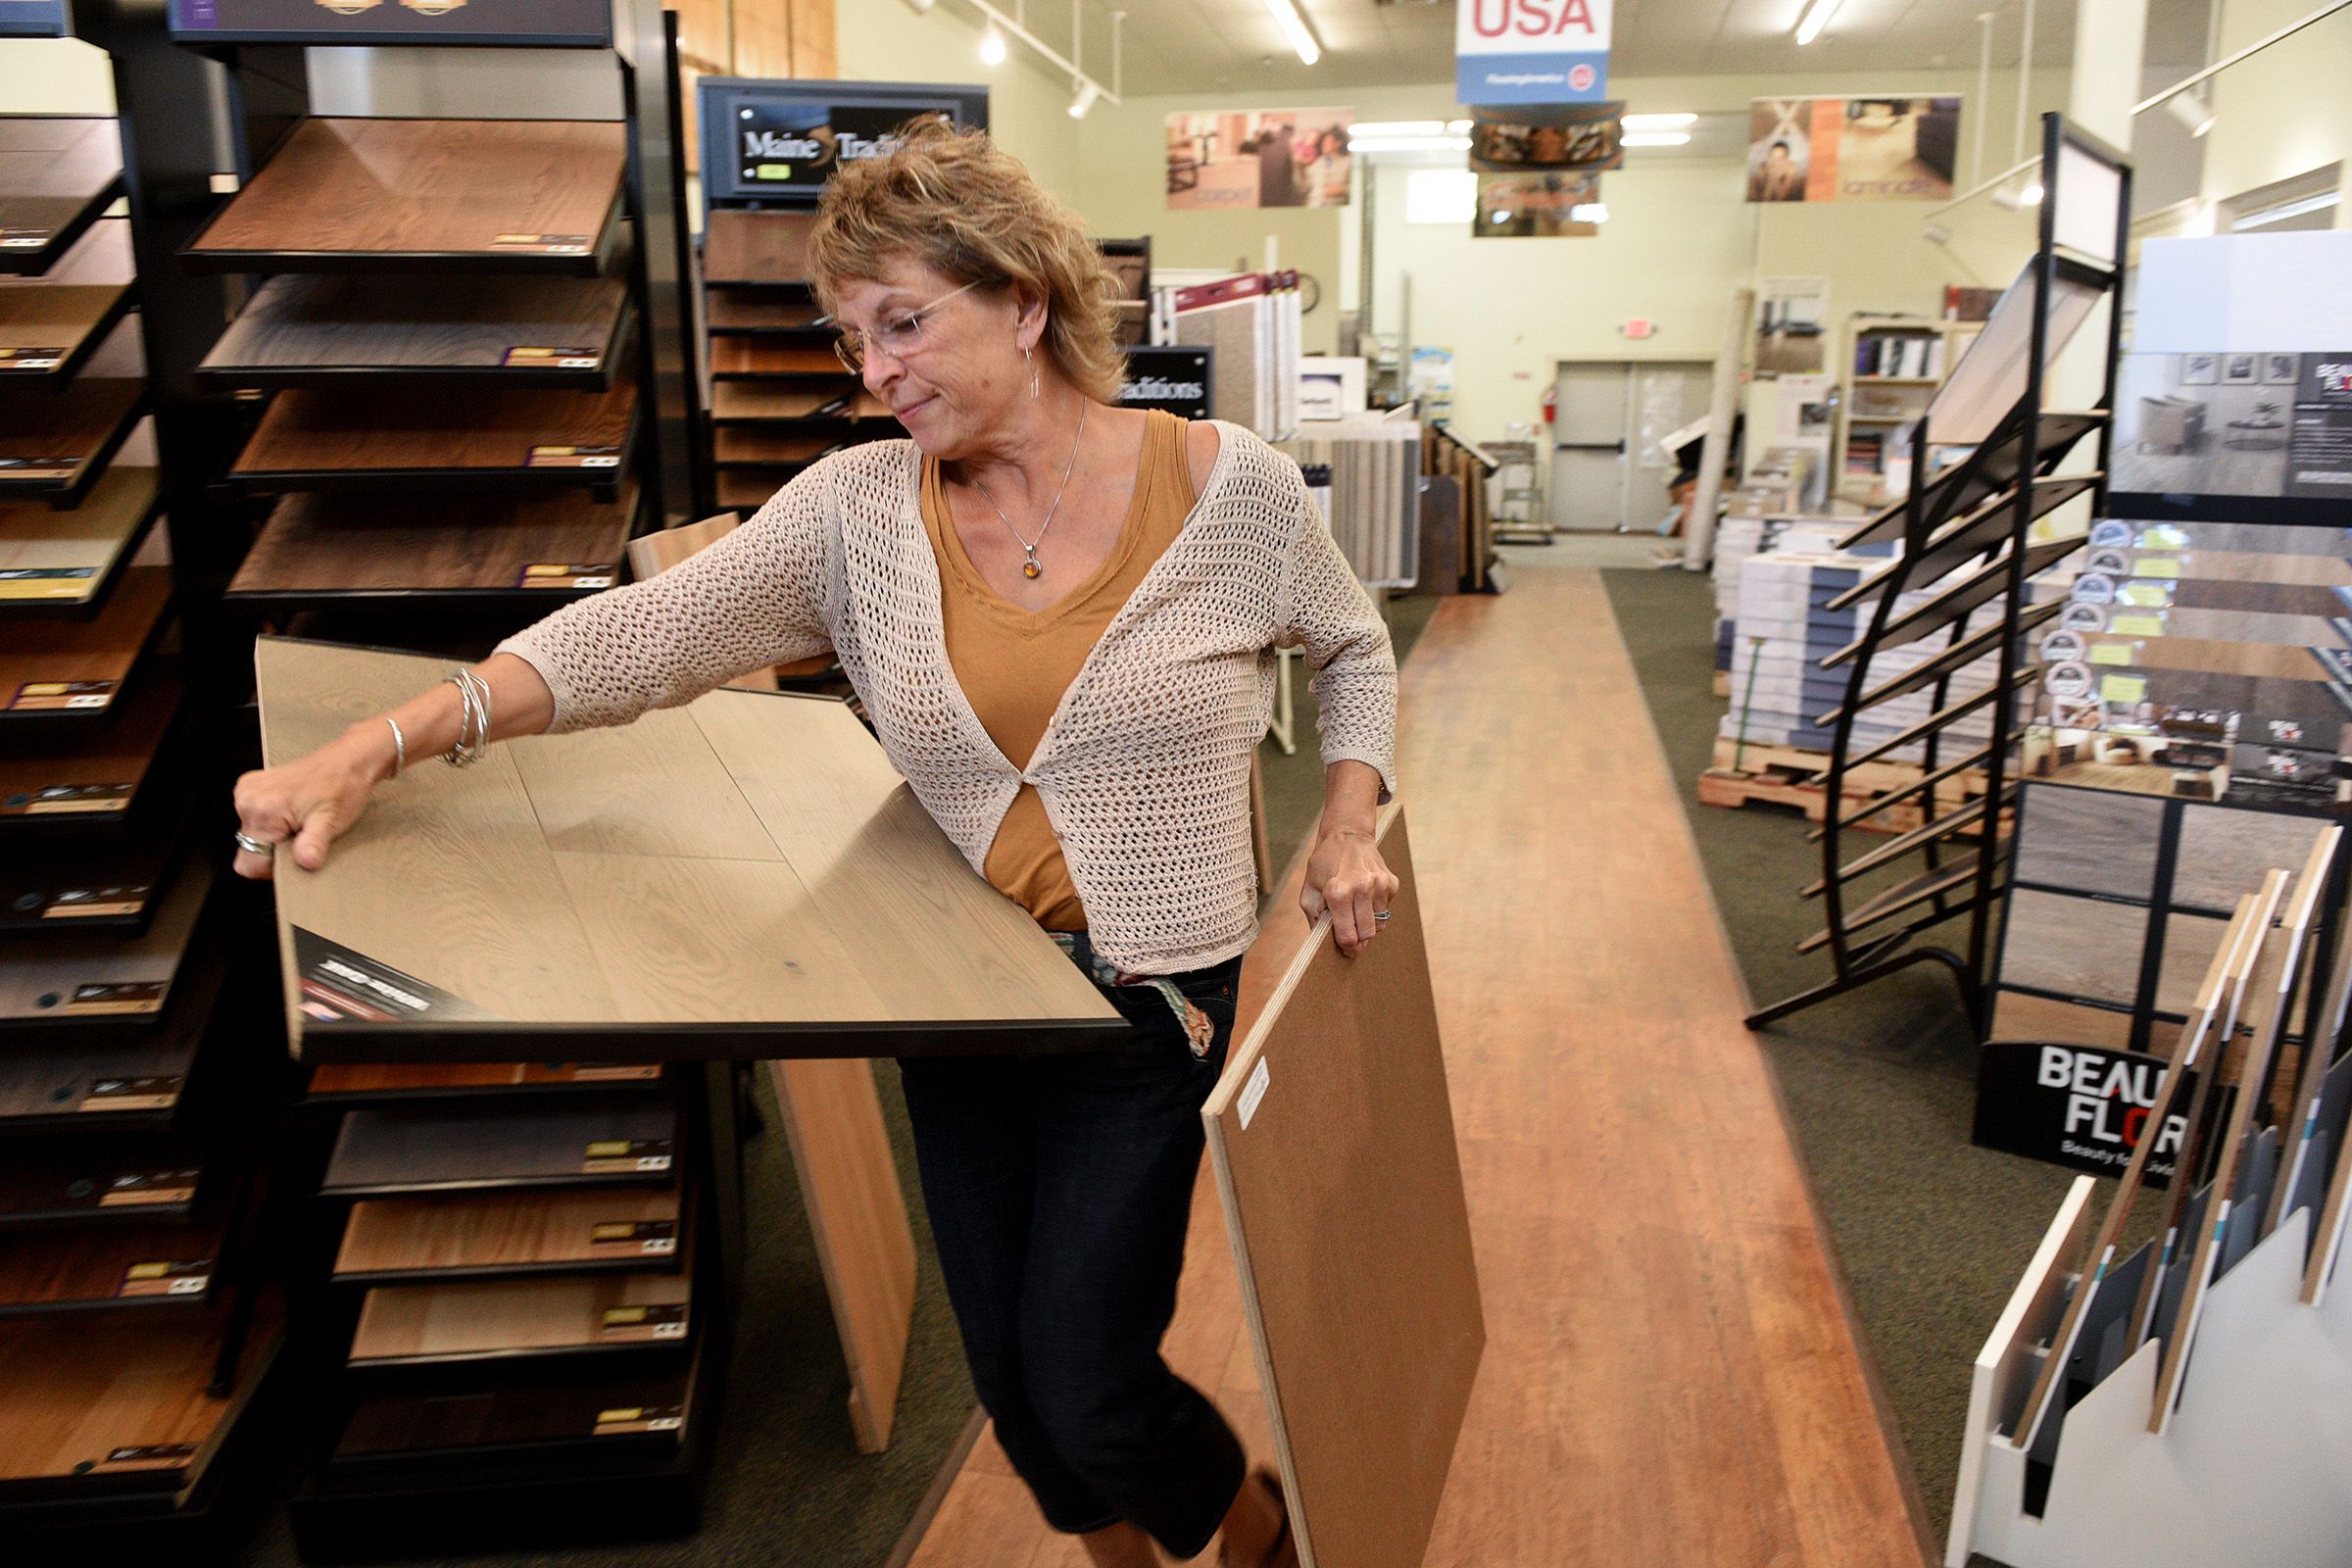 Kitchen designer Sheila Varnese grabs a couple samples for a client at LaValley Building Supply in West Lebanon, N.H., on Wednesday, June 29, 2022. ( Valley News - Jennifer Hauck) Copyright Valley News. May not be reprinted or used online without permission. Send requests to permission@vnews.com.